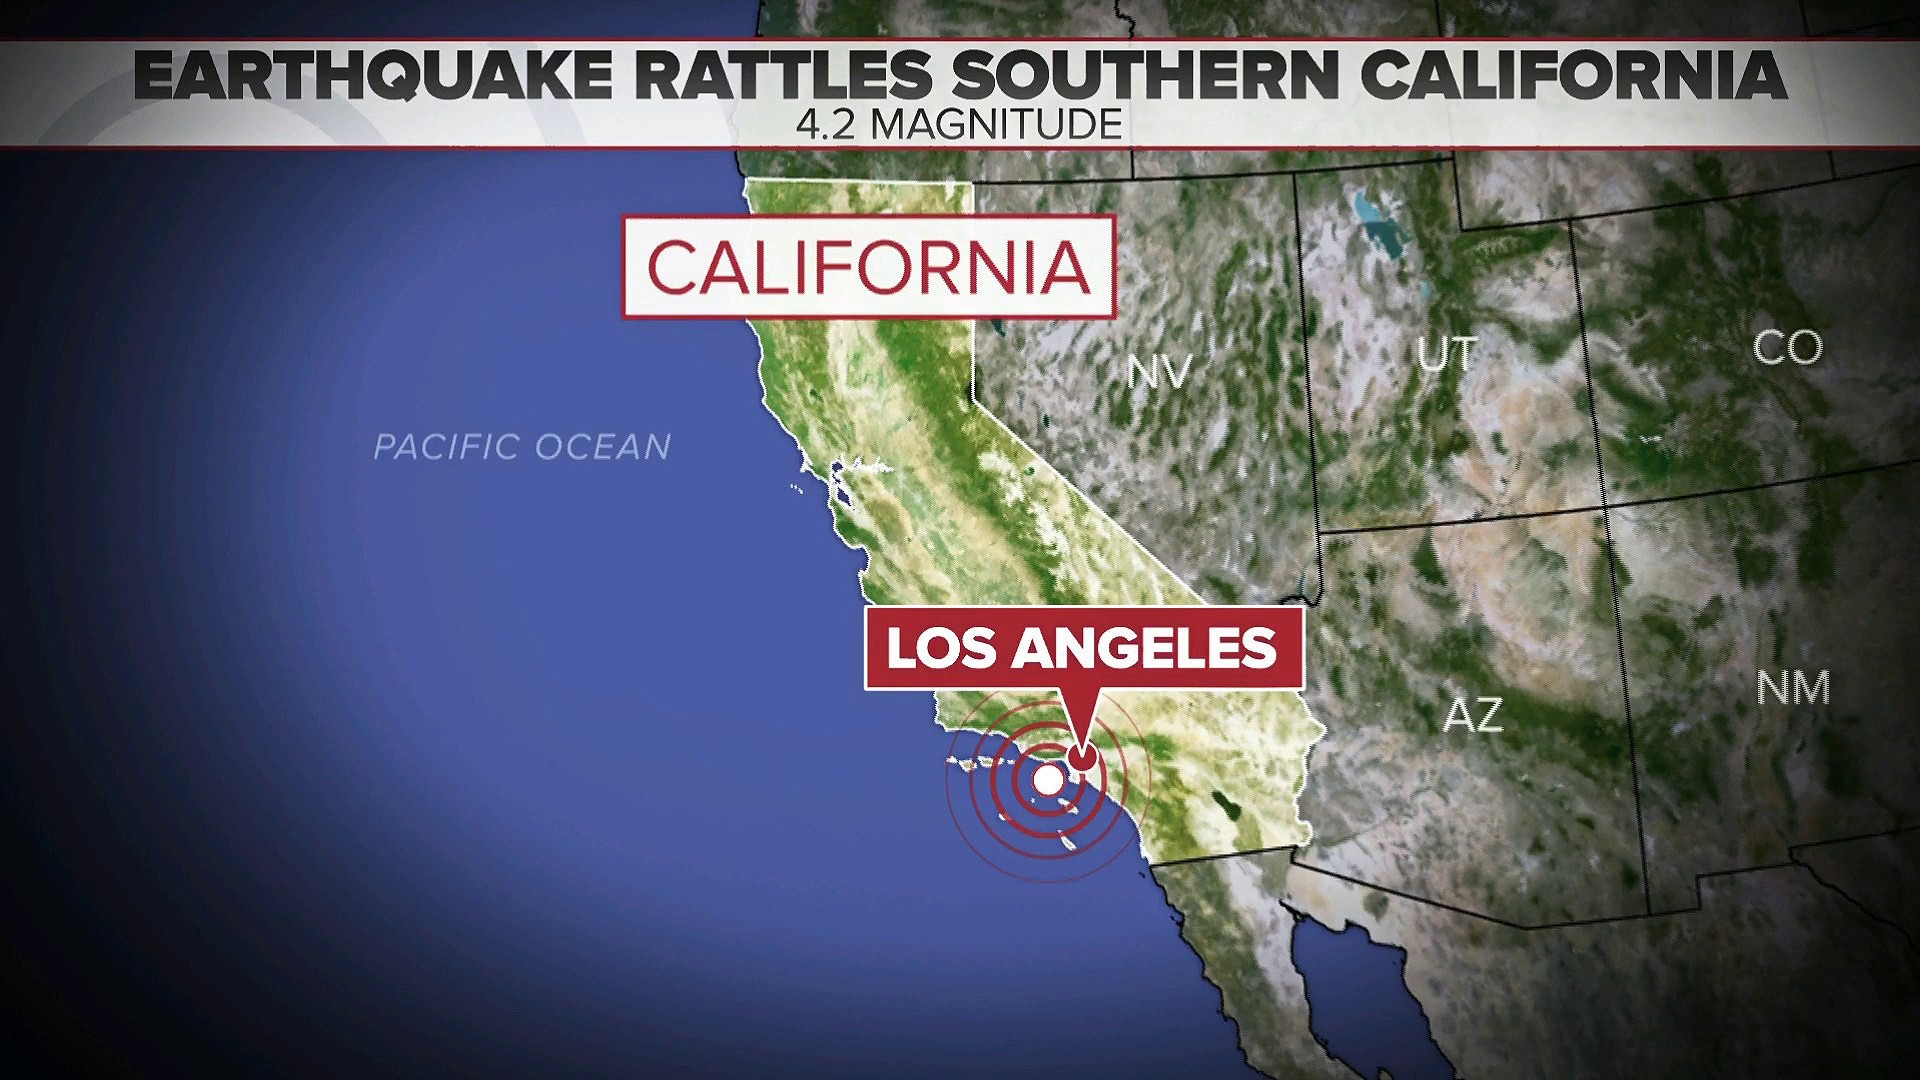 4.2 magnitude earthquake rattles Southern California and los angeles